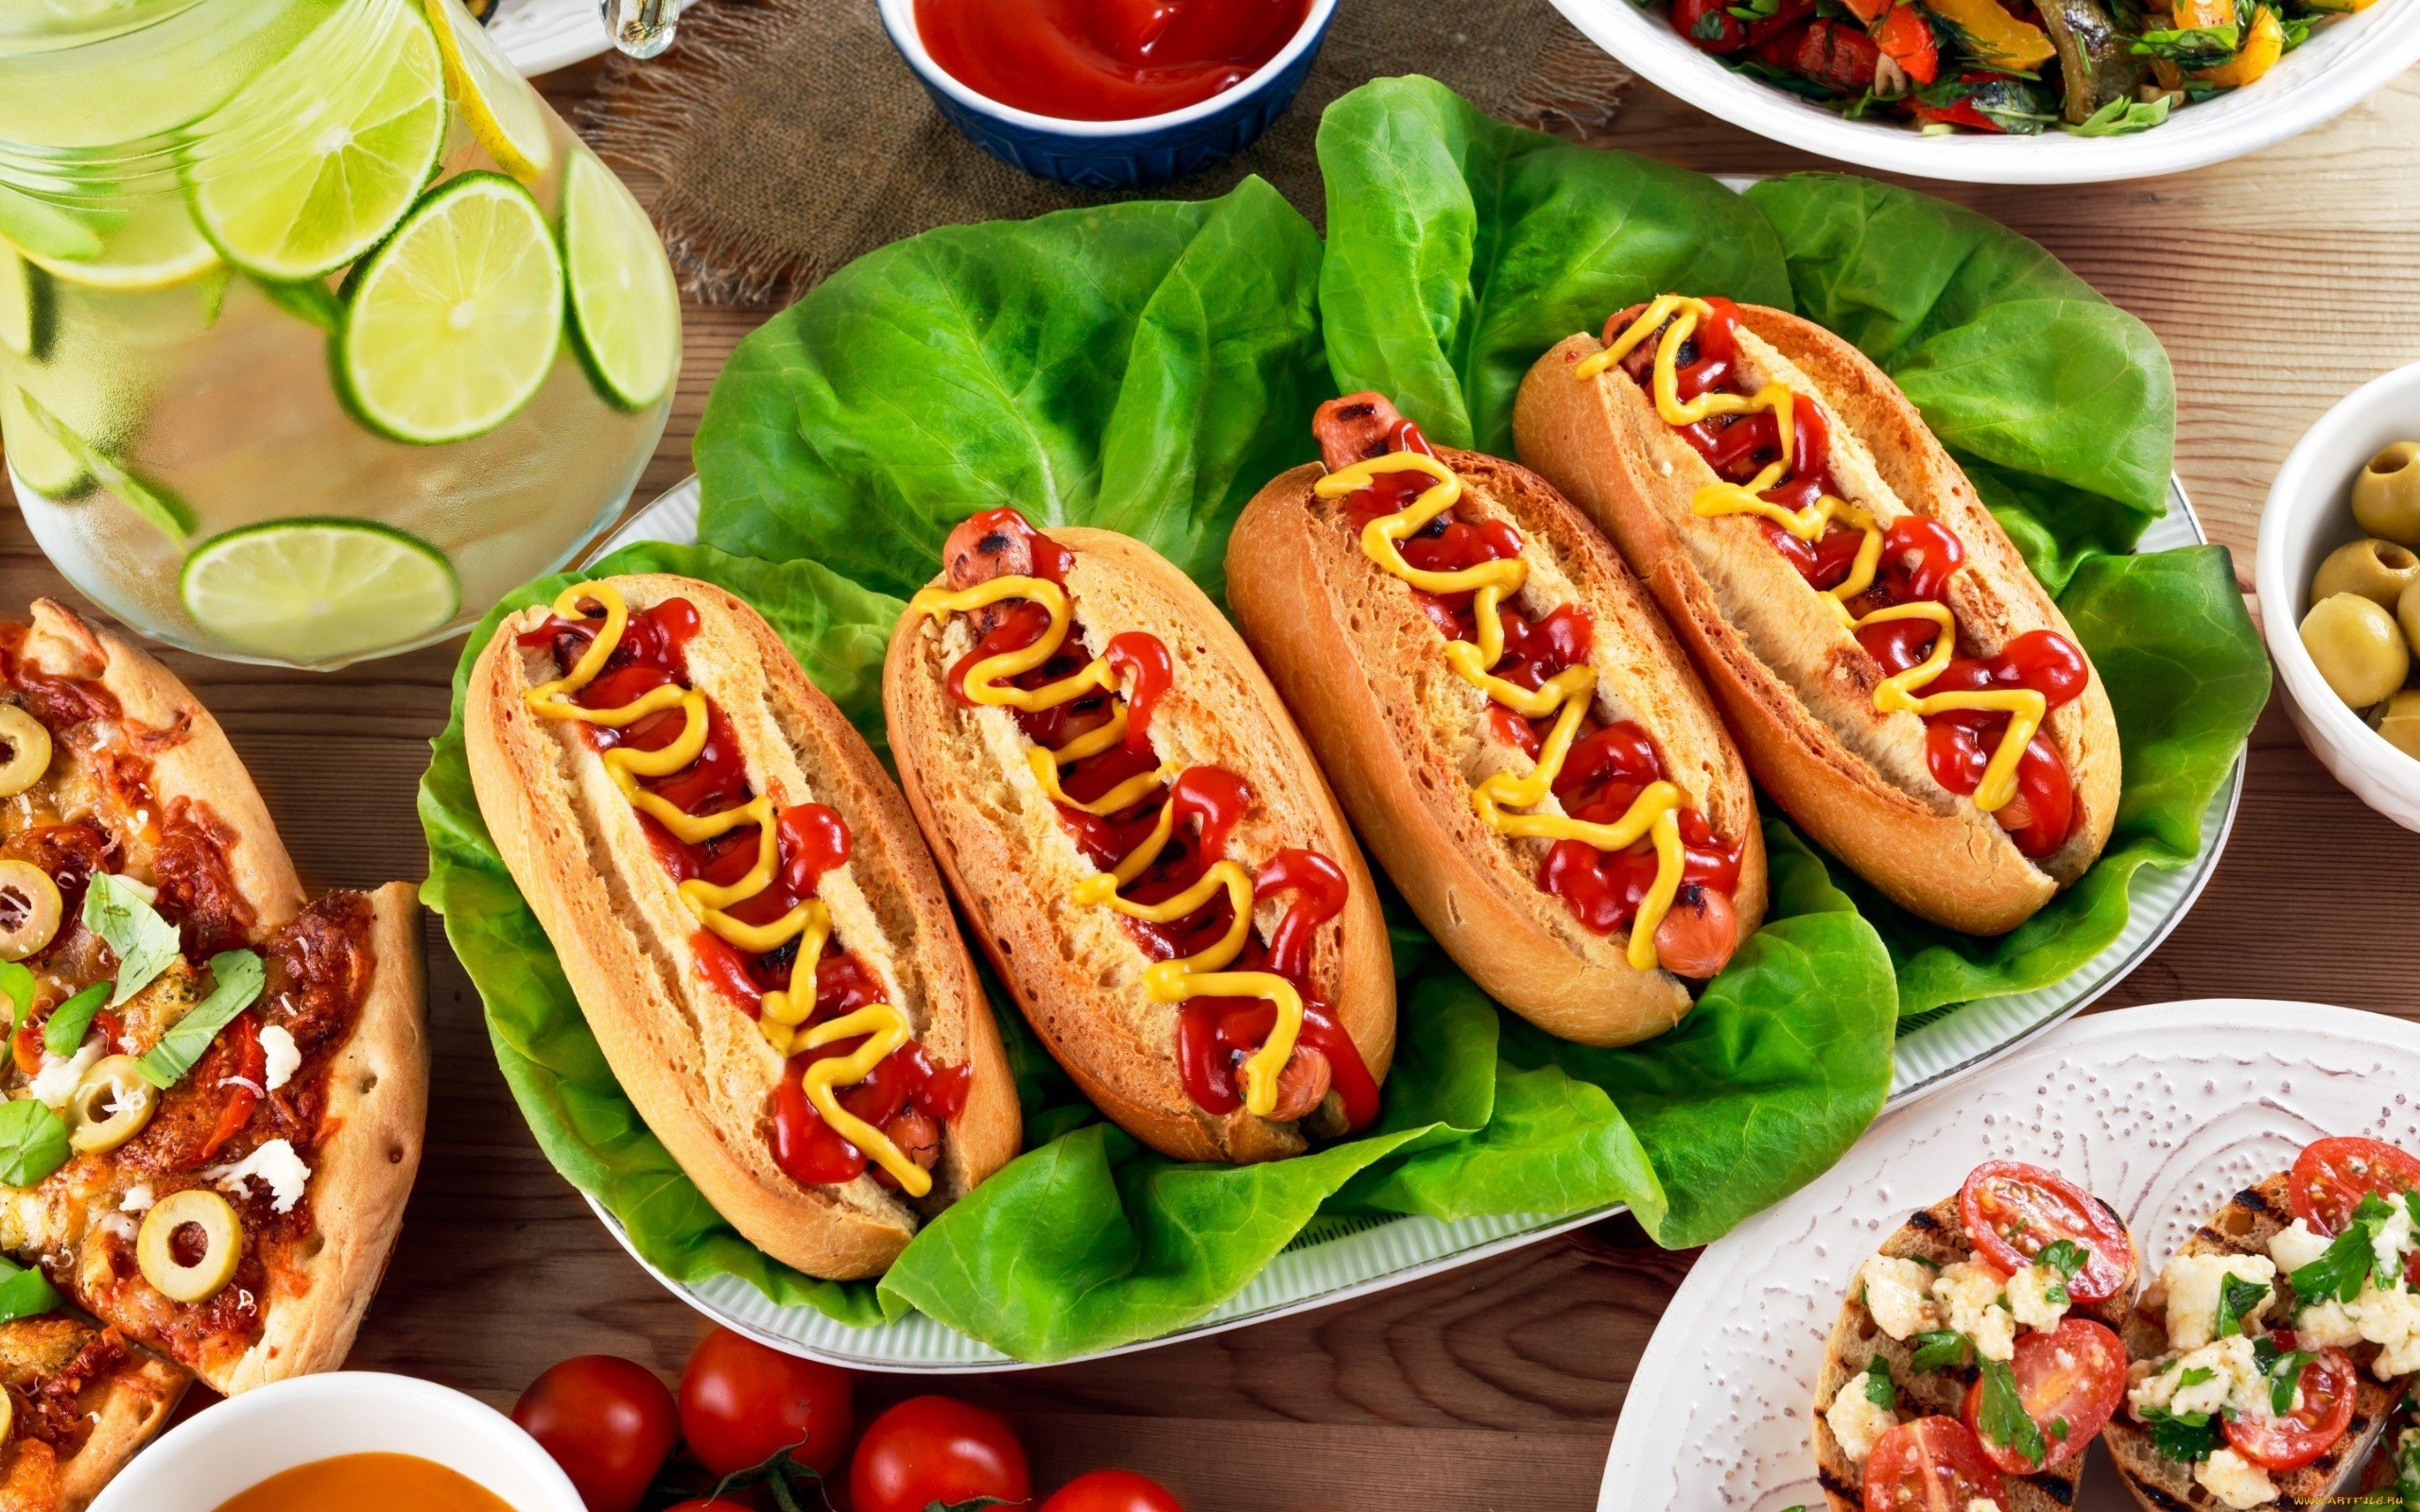 Hot Dogs Food Hd Wallpapers Desktop And Mobile Images Photos Images, Photos, Reviews